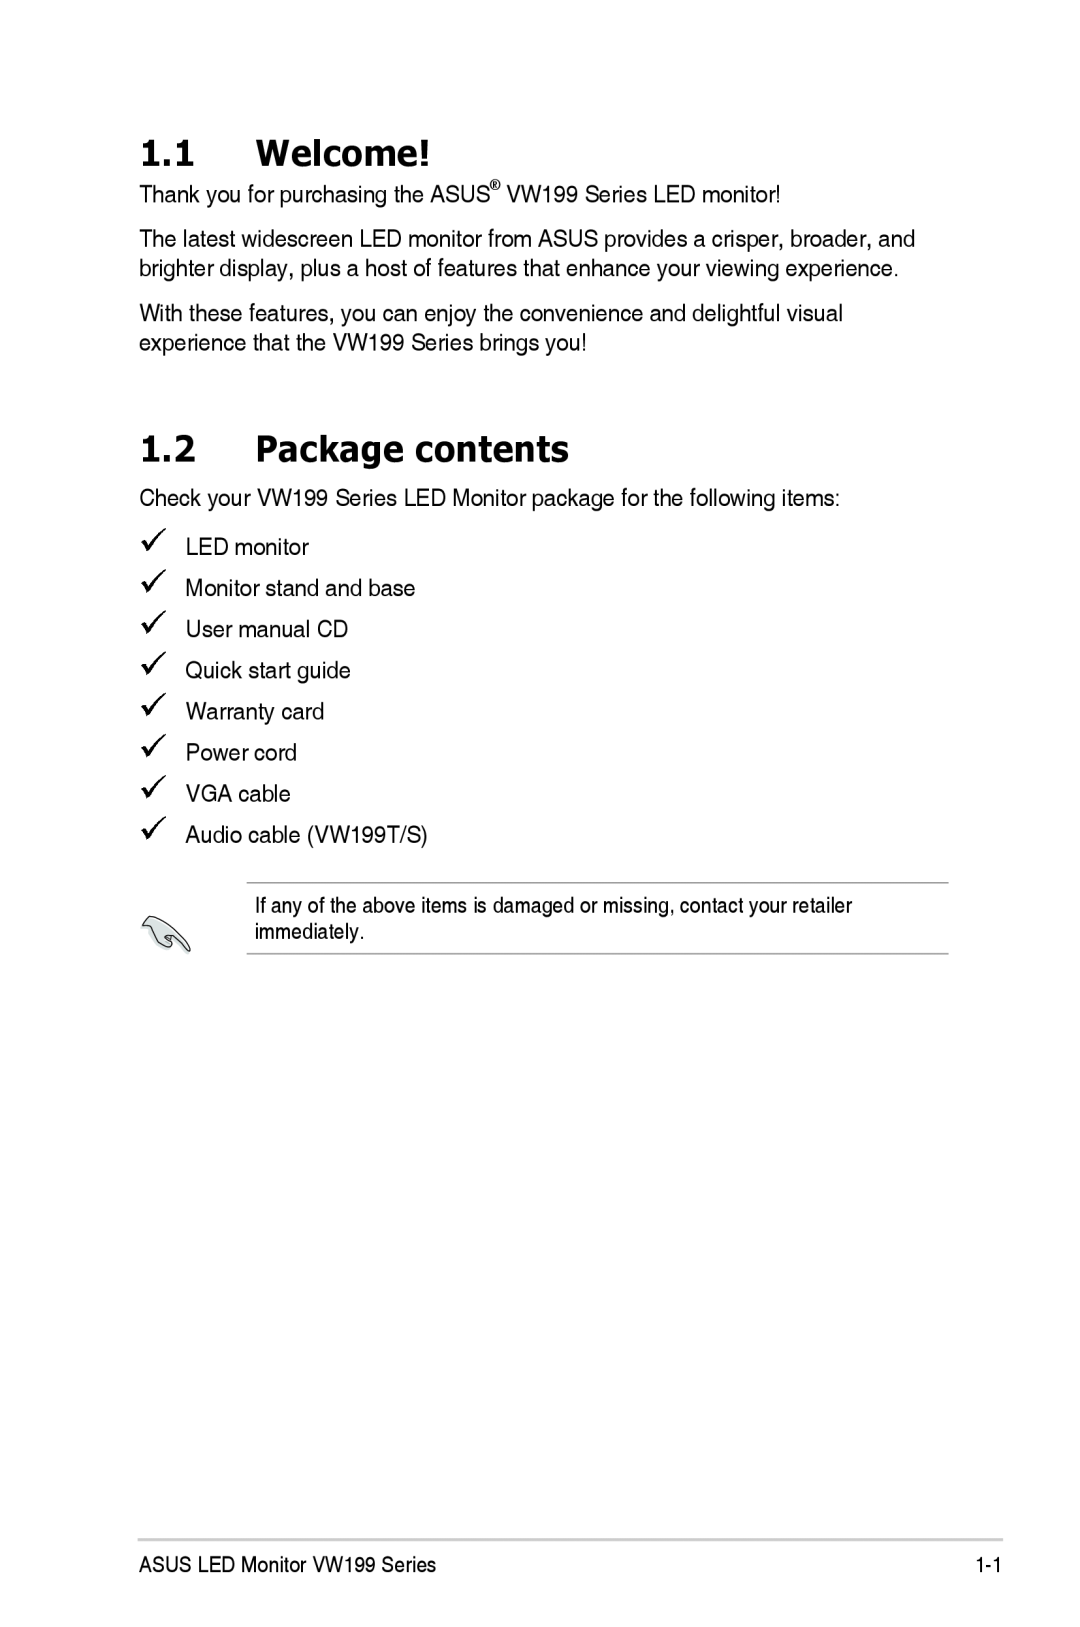 Sears VW199 manual Welcome, Package contents 